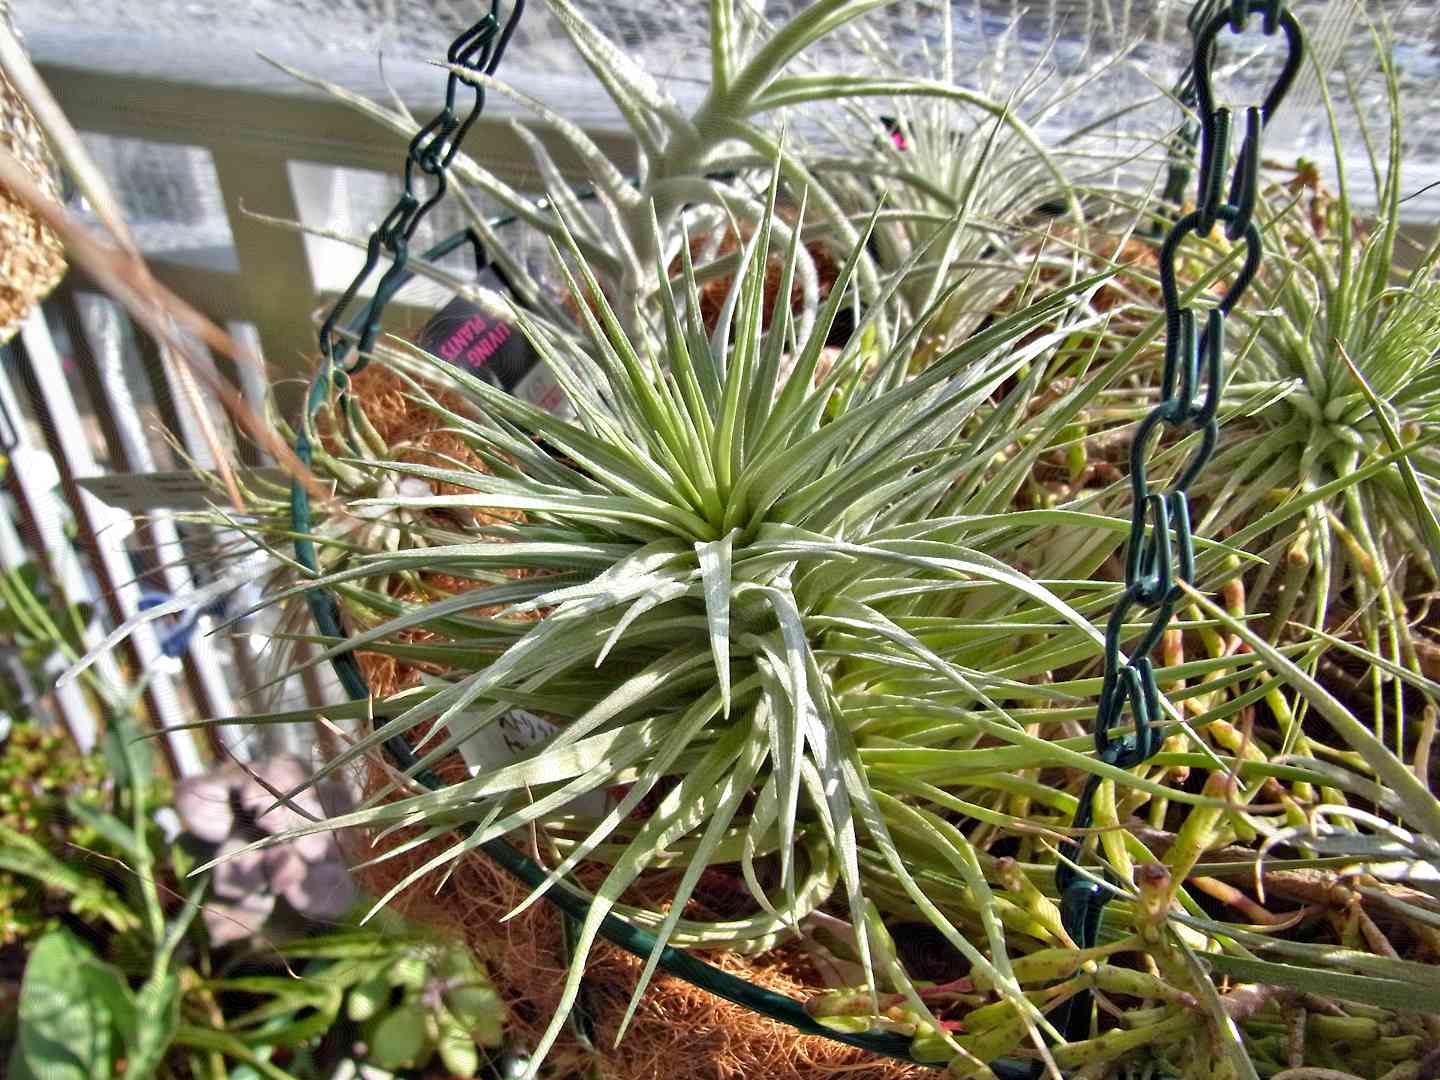 'Pink Bronze' air plants with silvery-green leaves